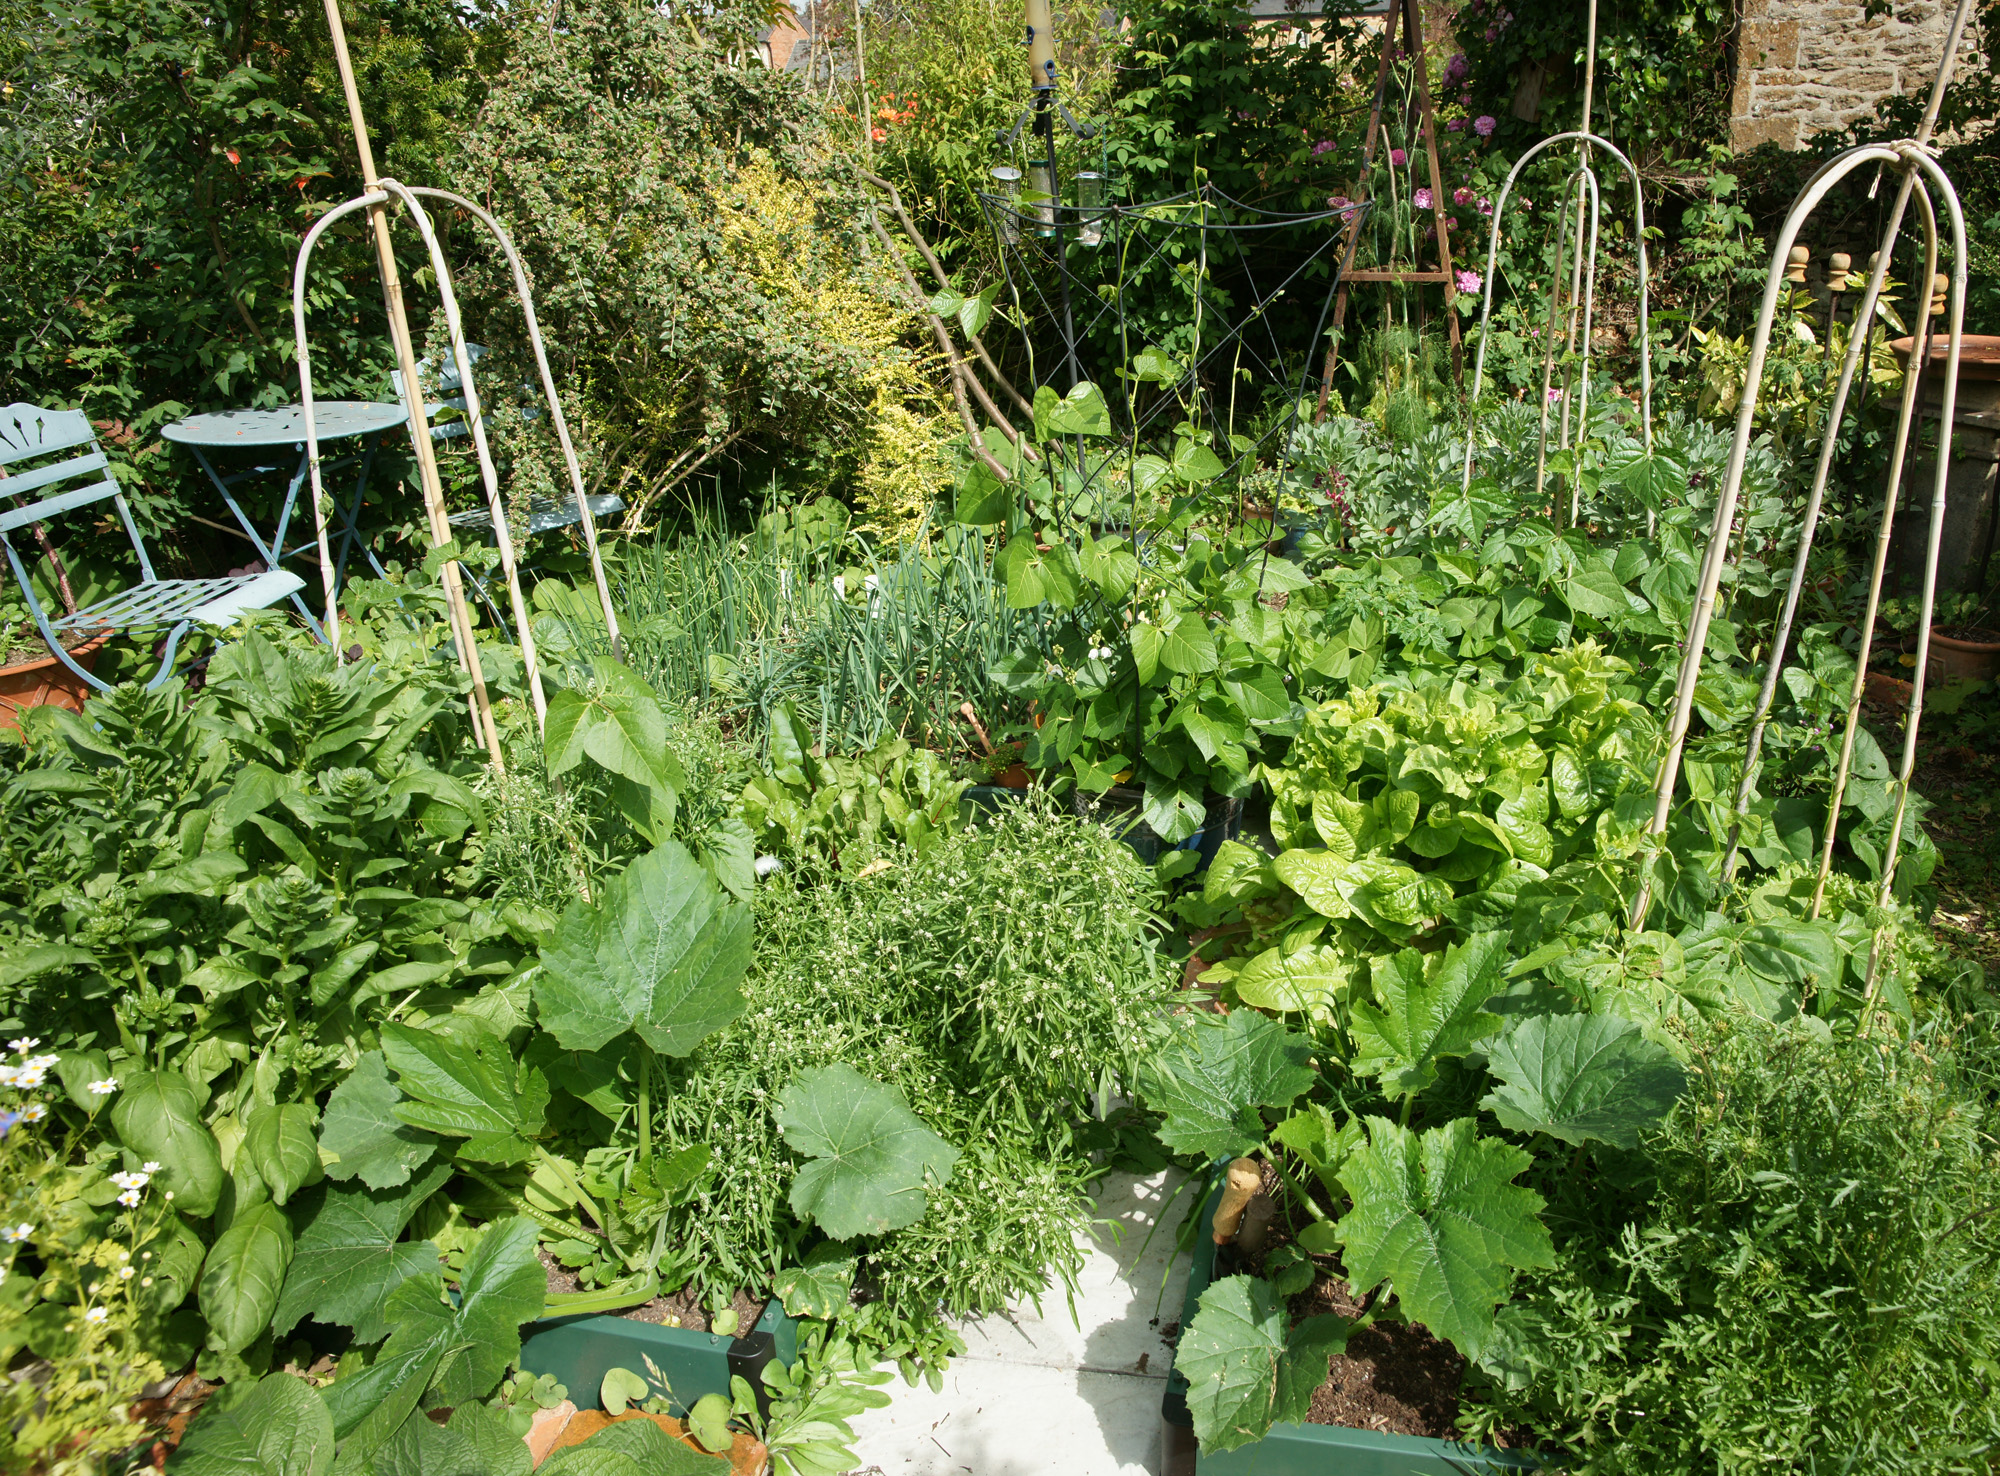 Four raised beds filled with vegetables and herbs in Summer 2013